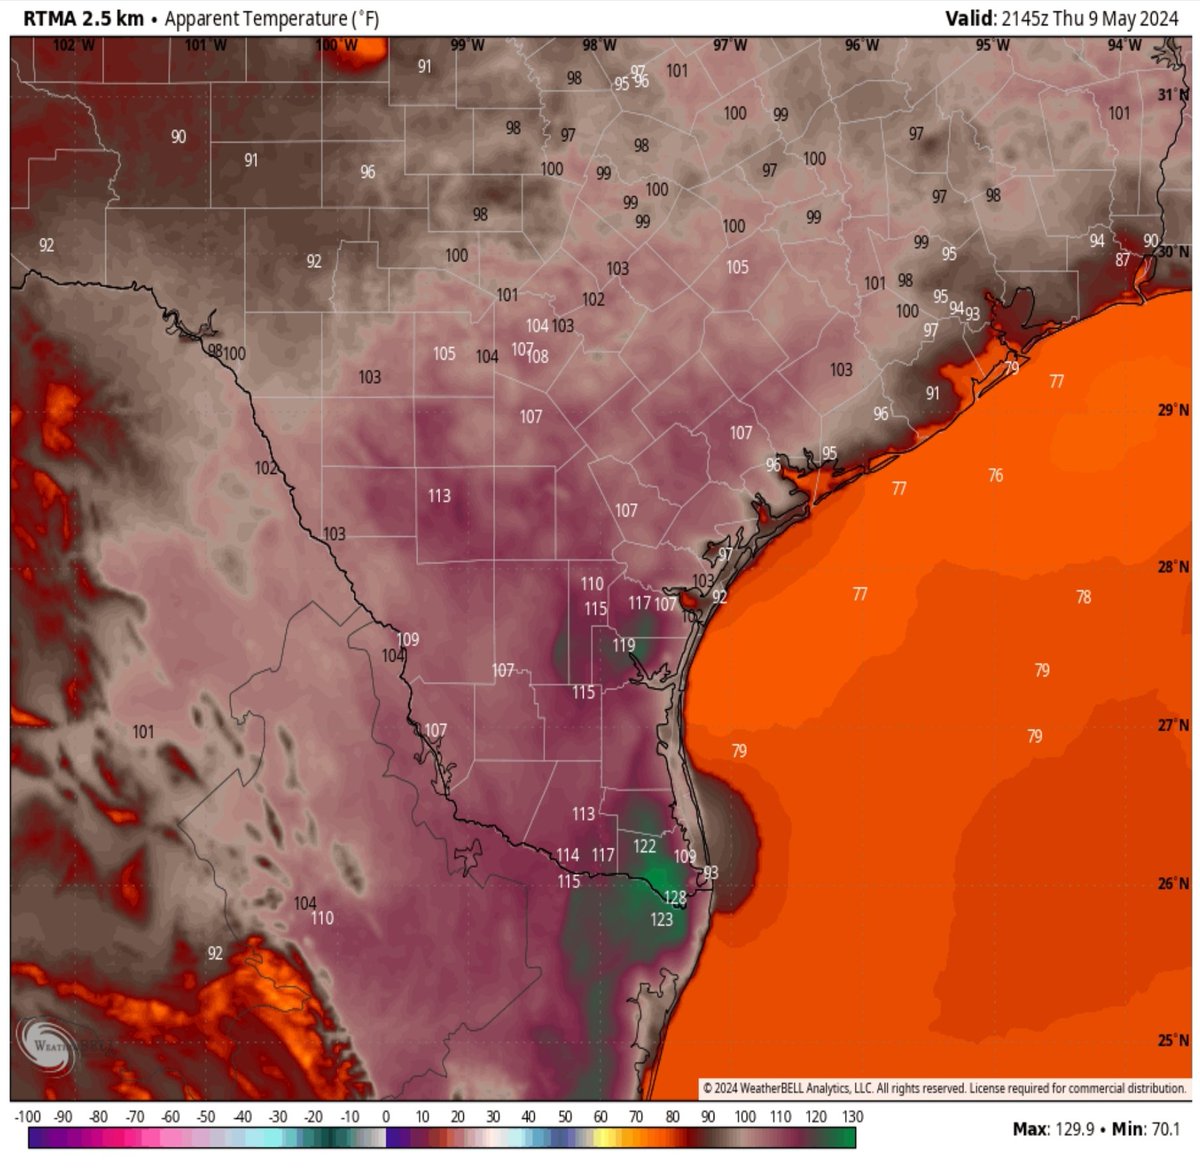 120-130°?!? If you think it's hot in Central Texas, it is other-worldly right now in south Texas where the heat index is near 130°. That is unfathomable heat #txwx